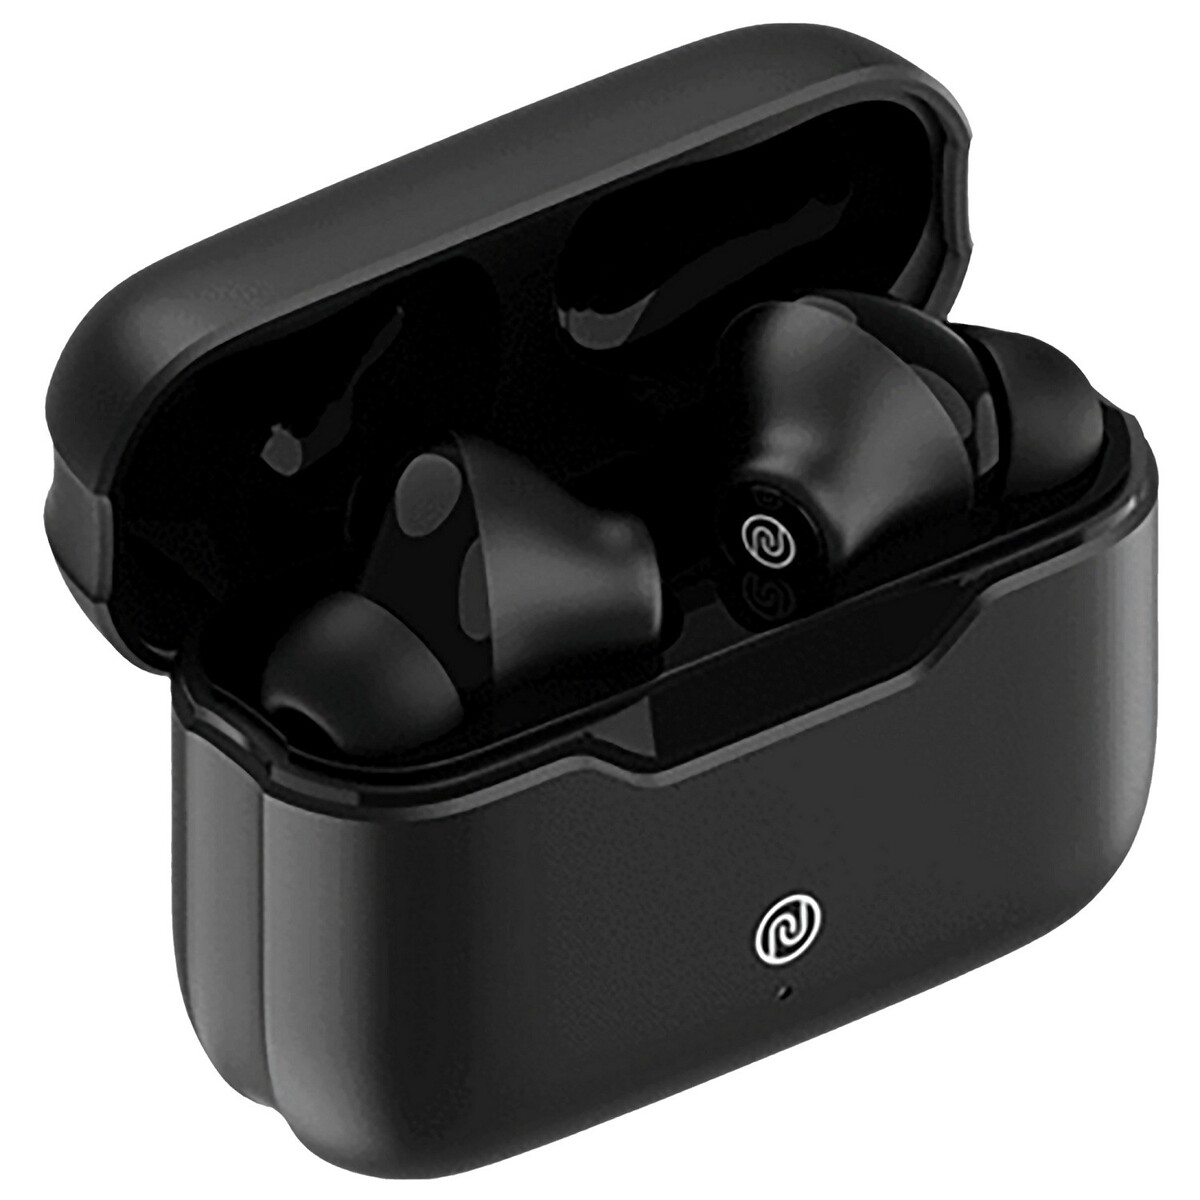 Noise Buds Smart Truly Wireless Bluetooth Earbuds with Hyper Sync technology, IPX5 water resistance, Full touch controls  Black